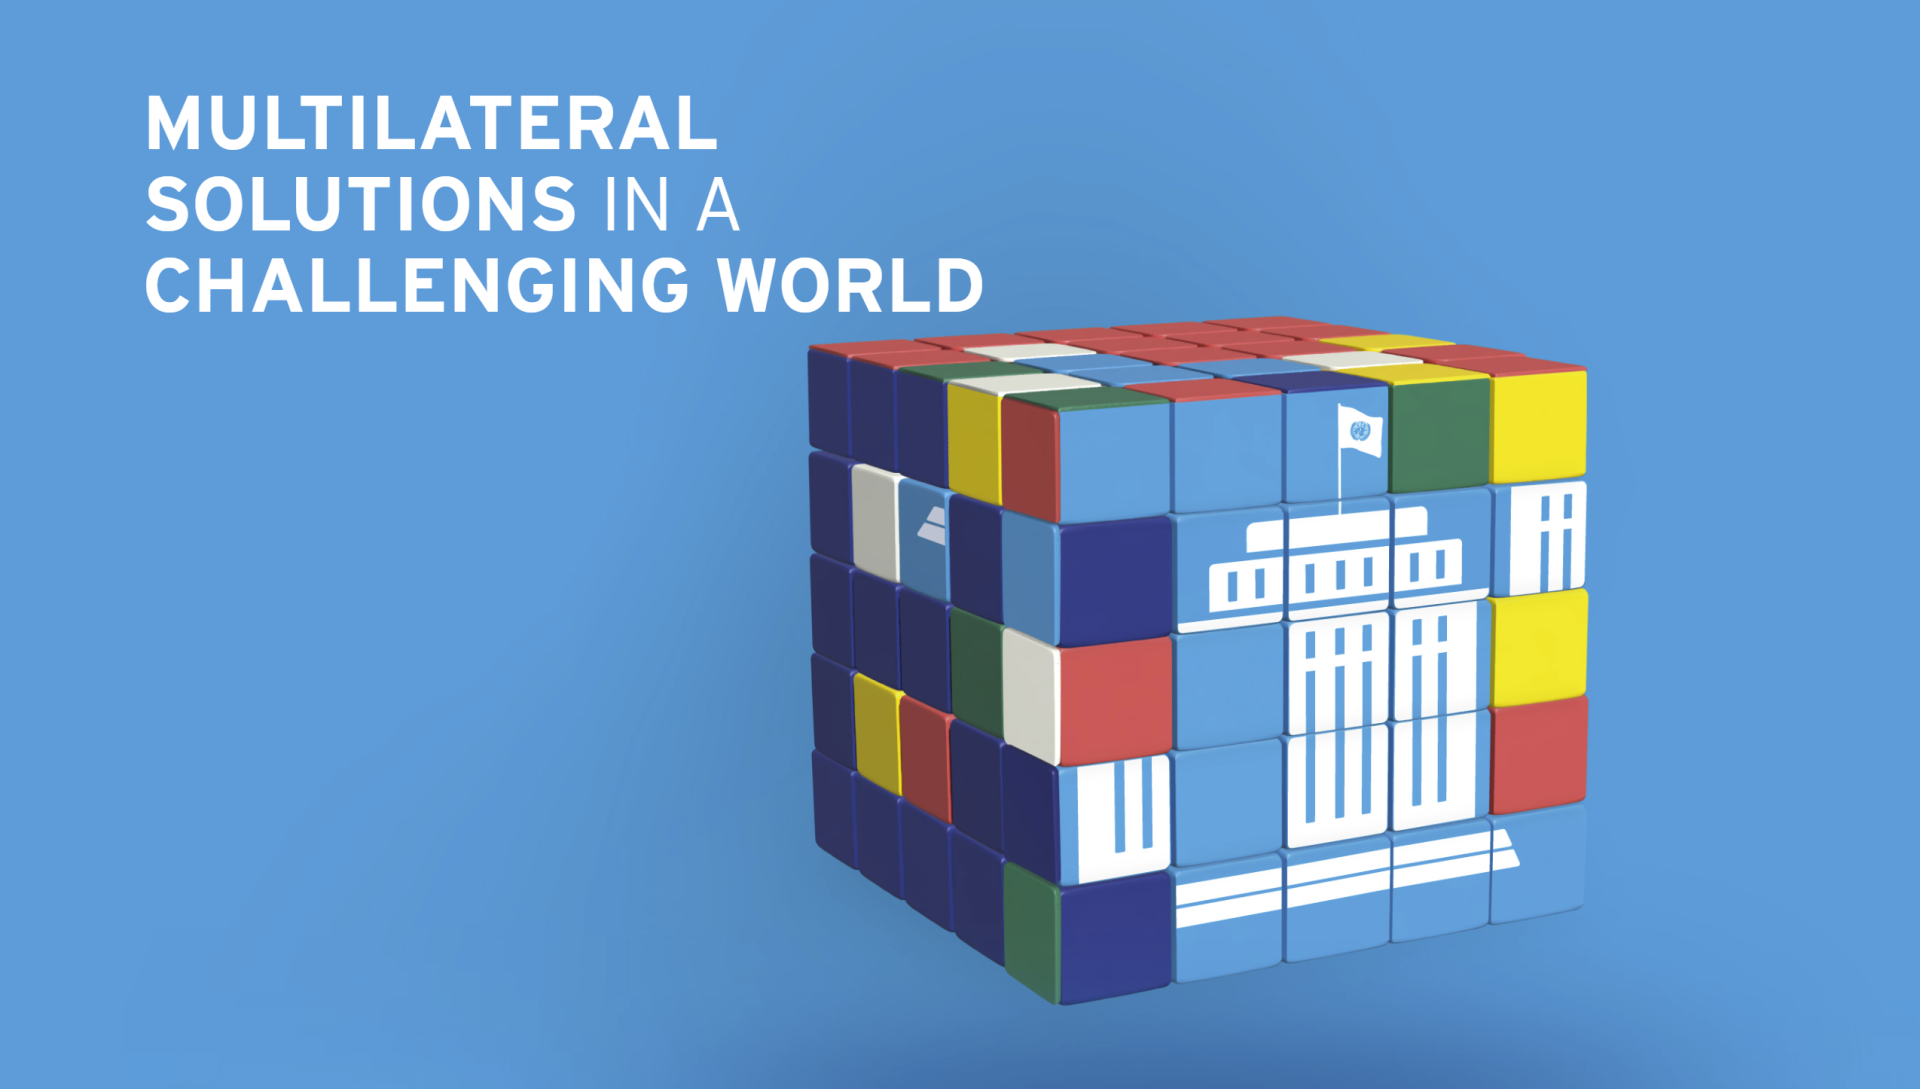 Title image of the UN Geneva Annual report with a Rubic's cube and the words "Multilateral solutions in a challenging world"